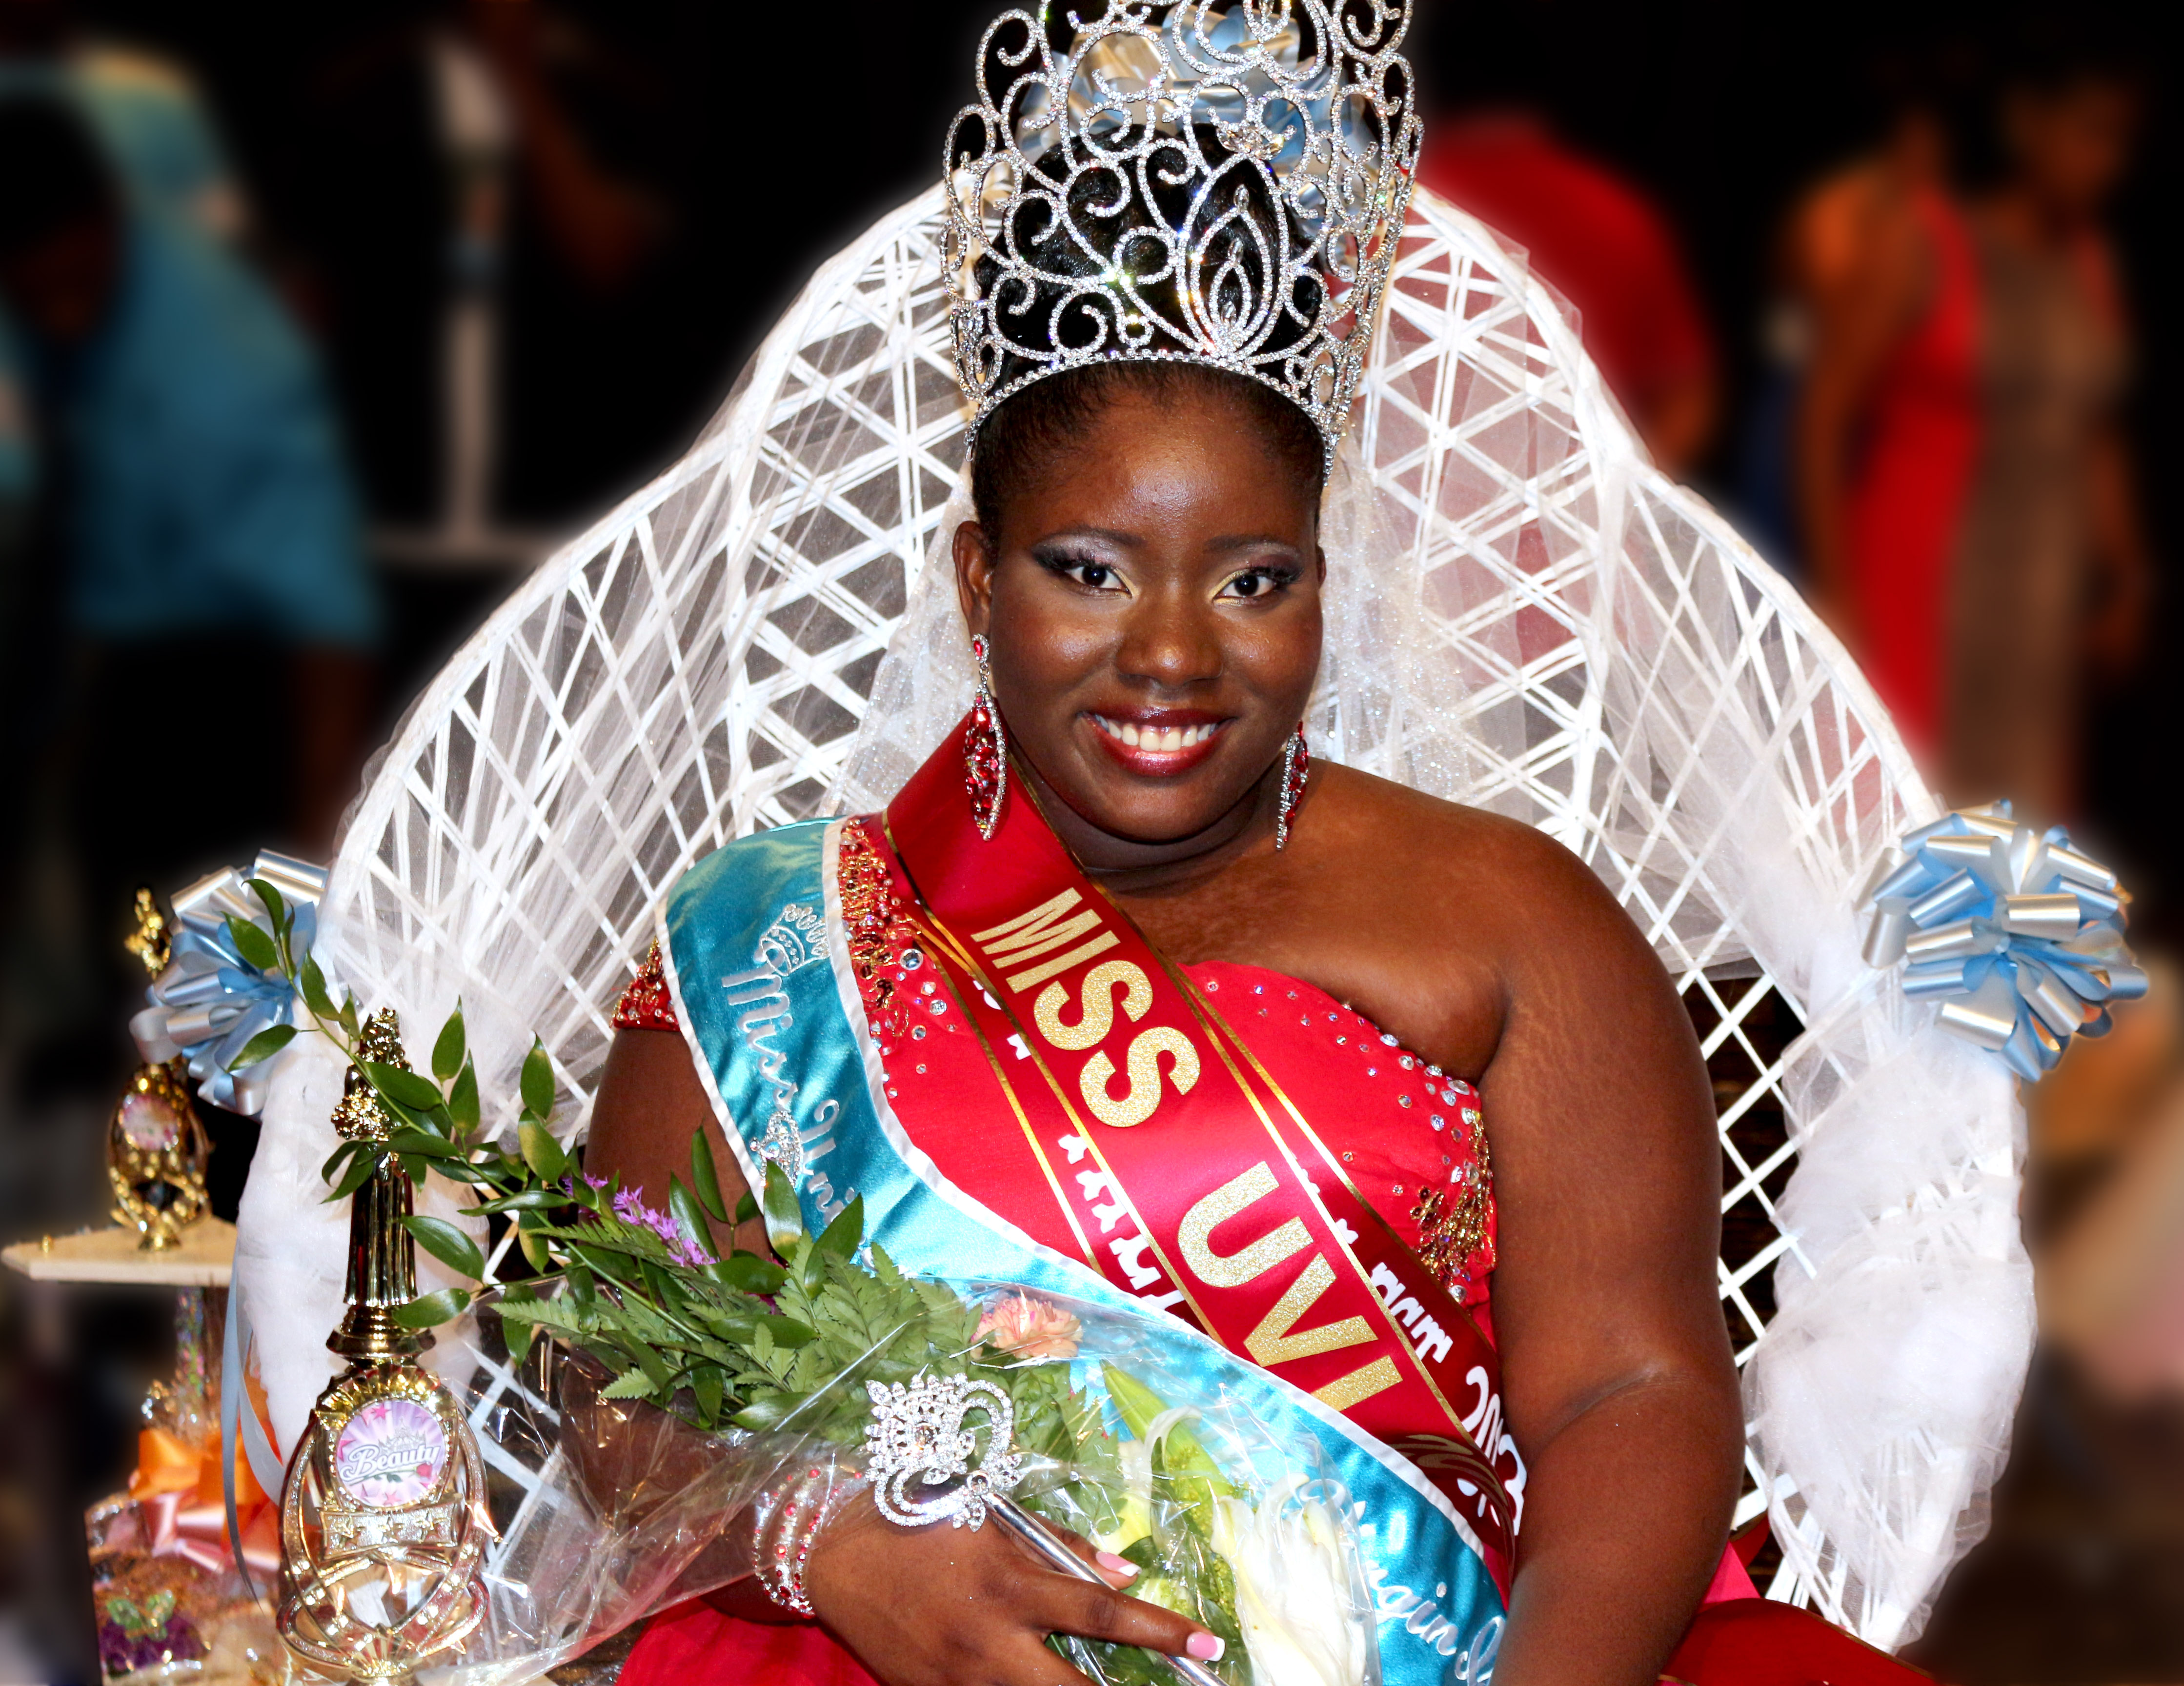 Miss UVI 2013 - 2014 Murchtricia Charles